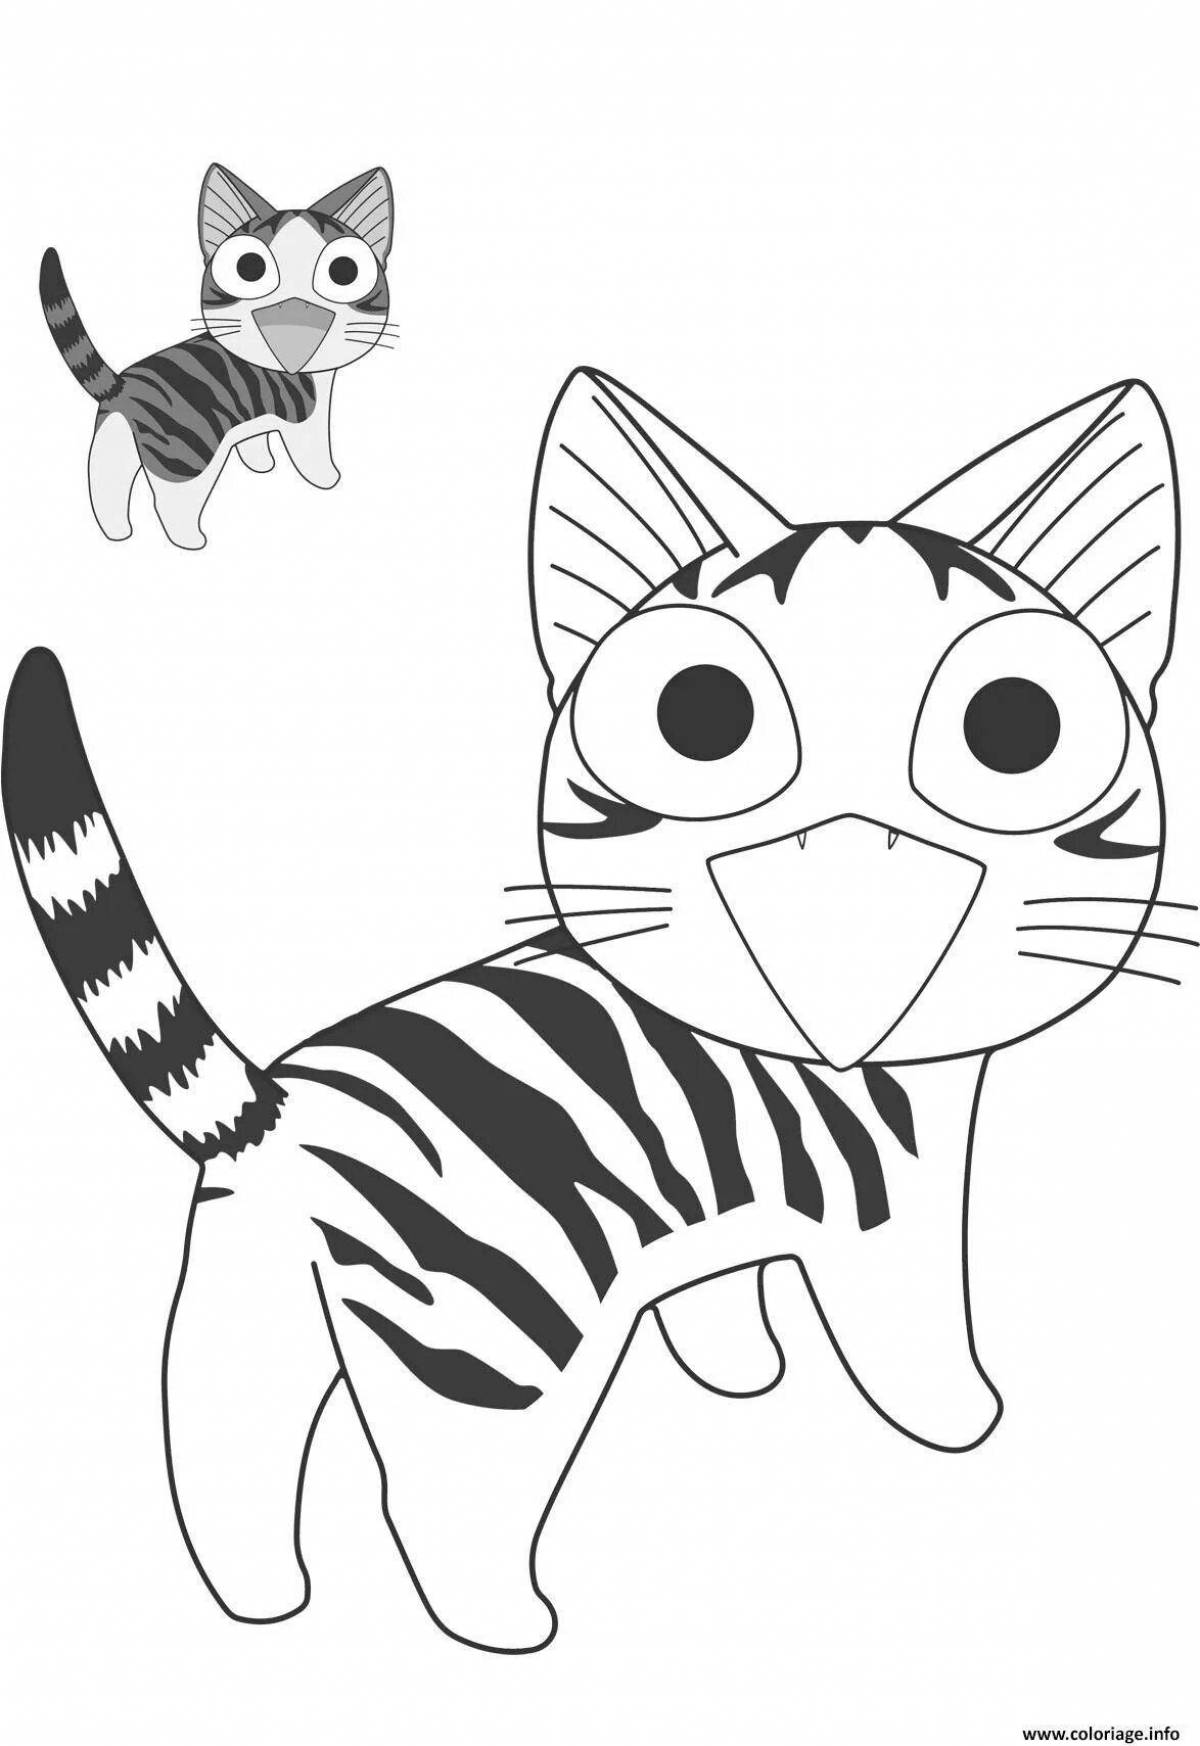 Adorable anime cat coloring book